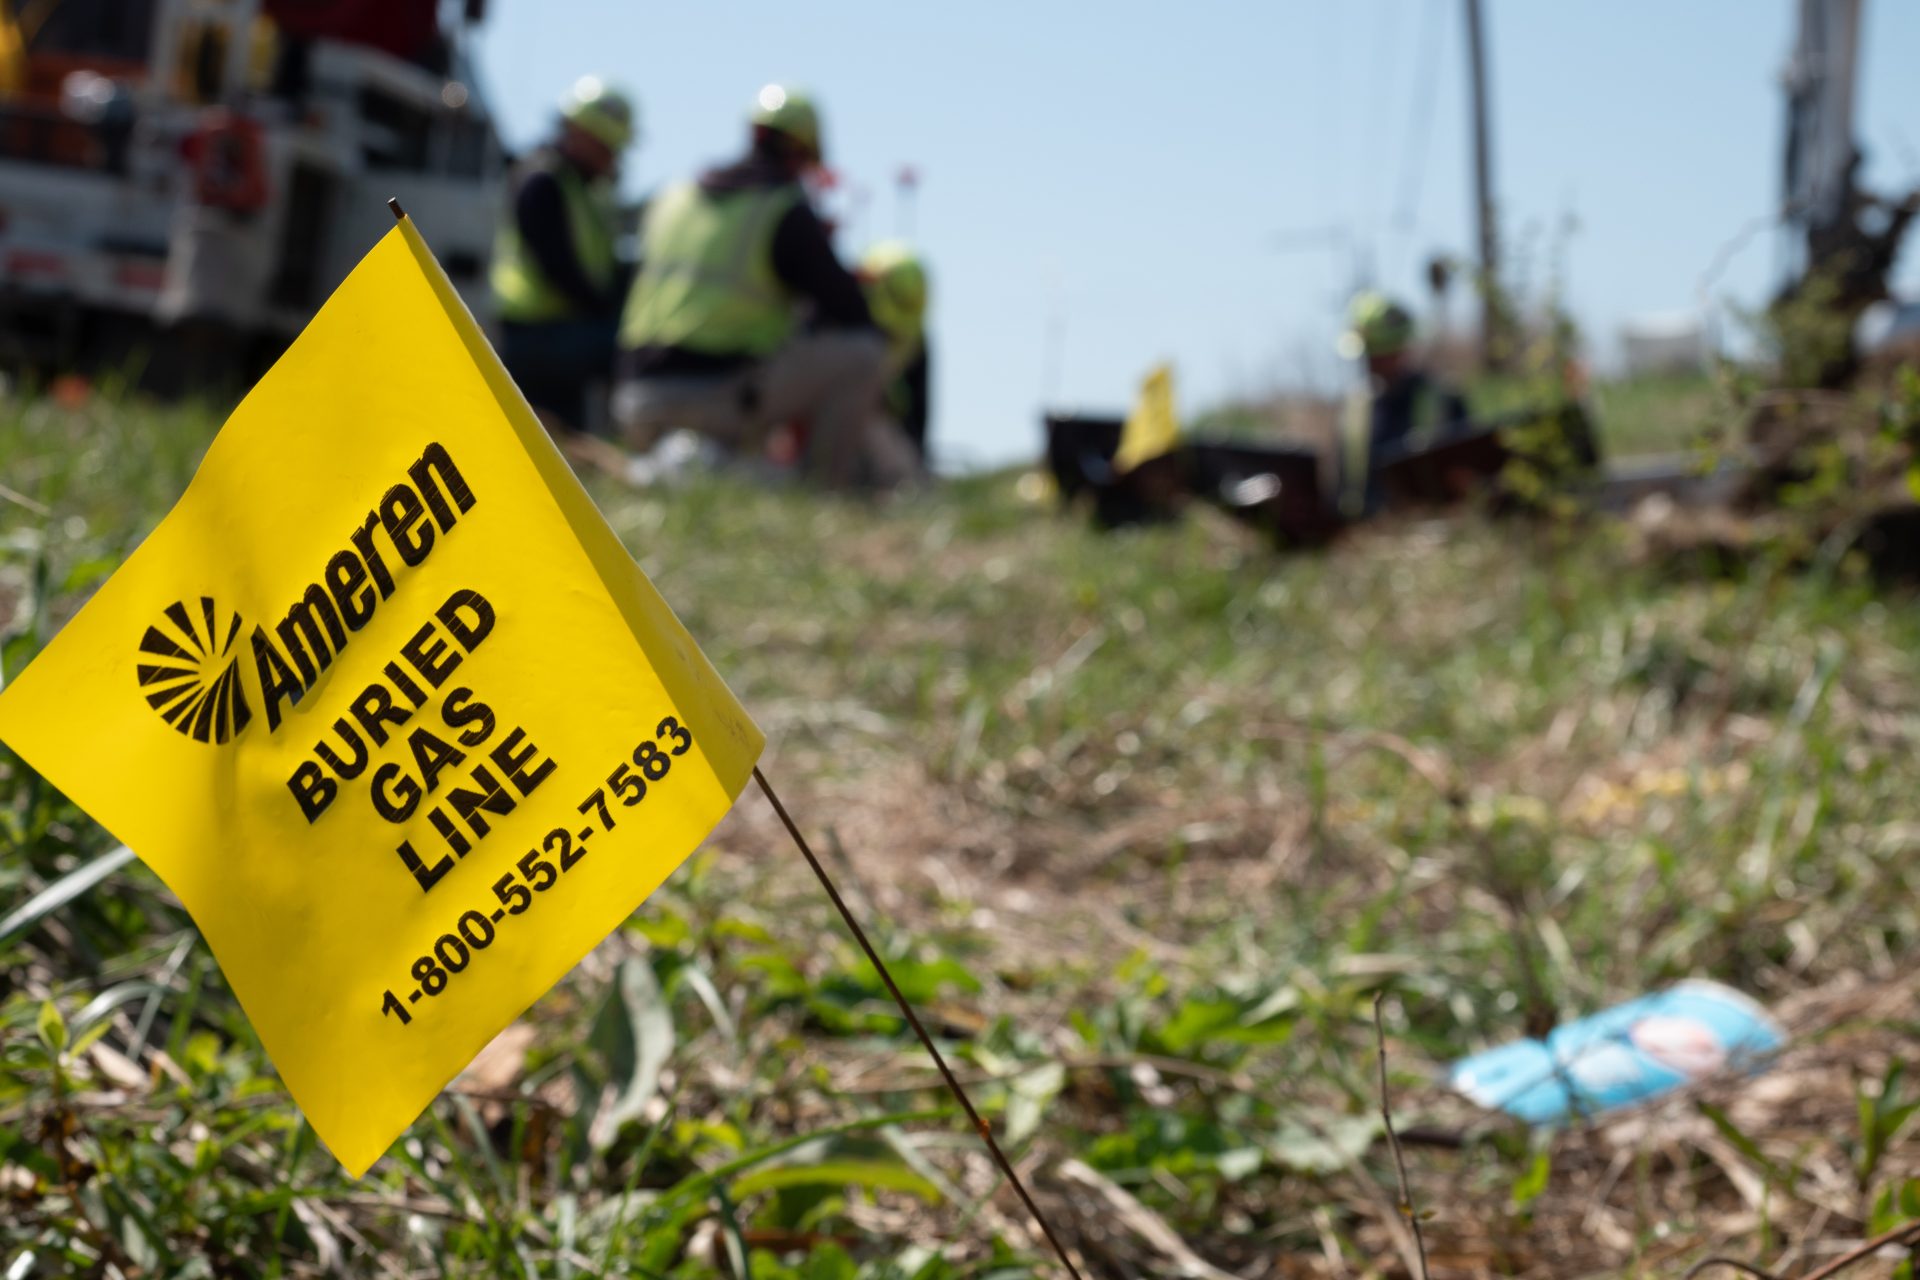 (LISTEN): Ameren Missouri urges residents to call 811 before digging